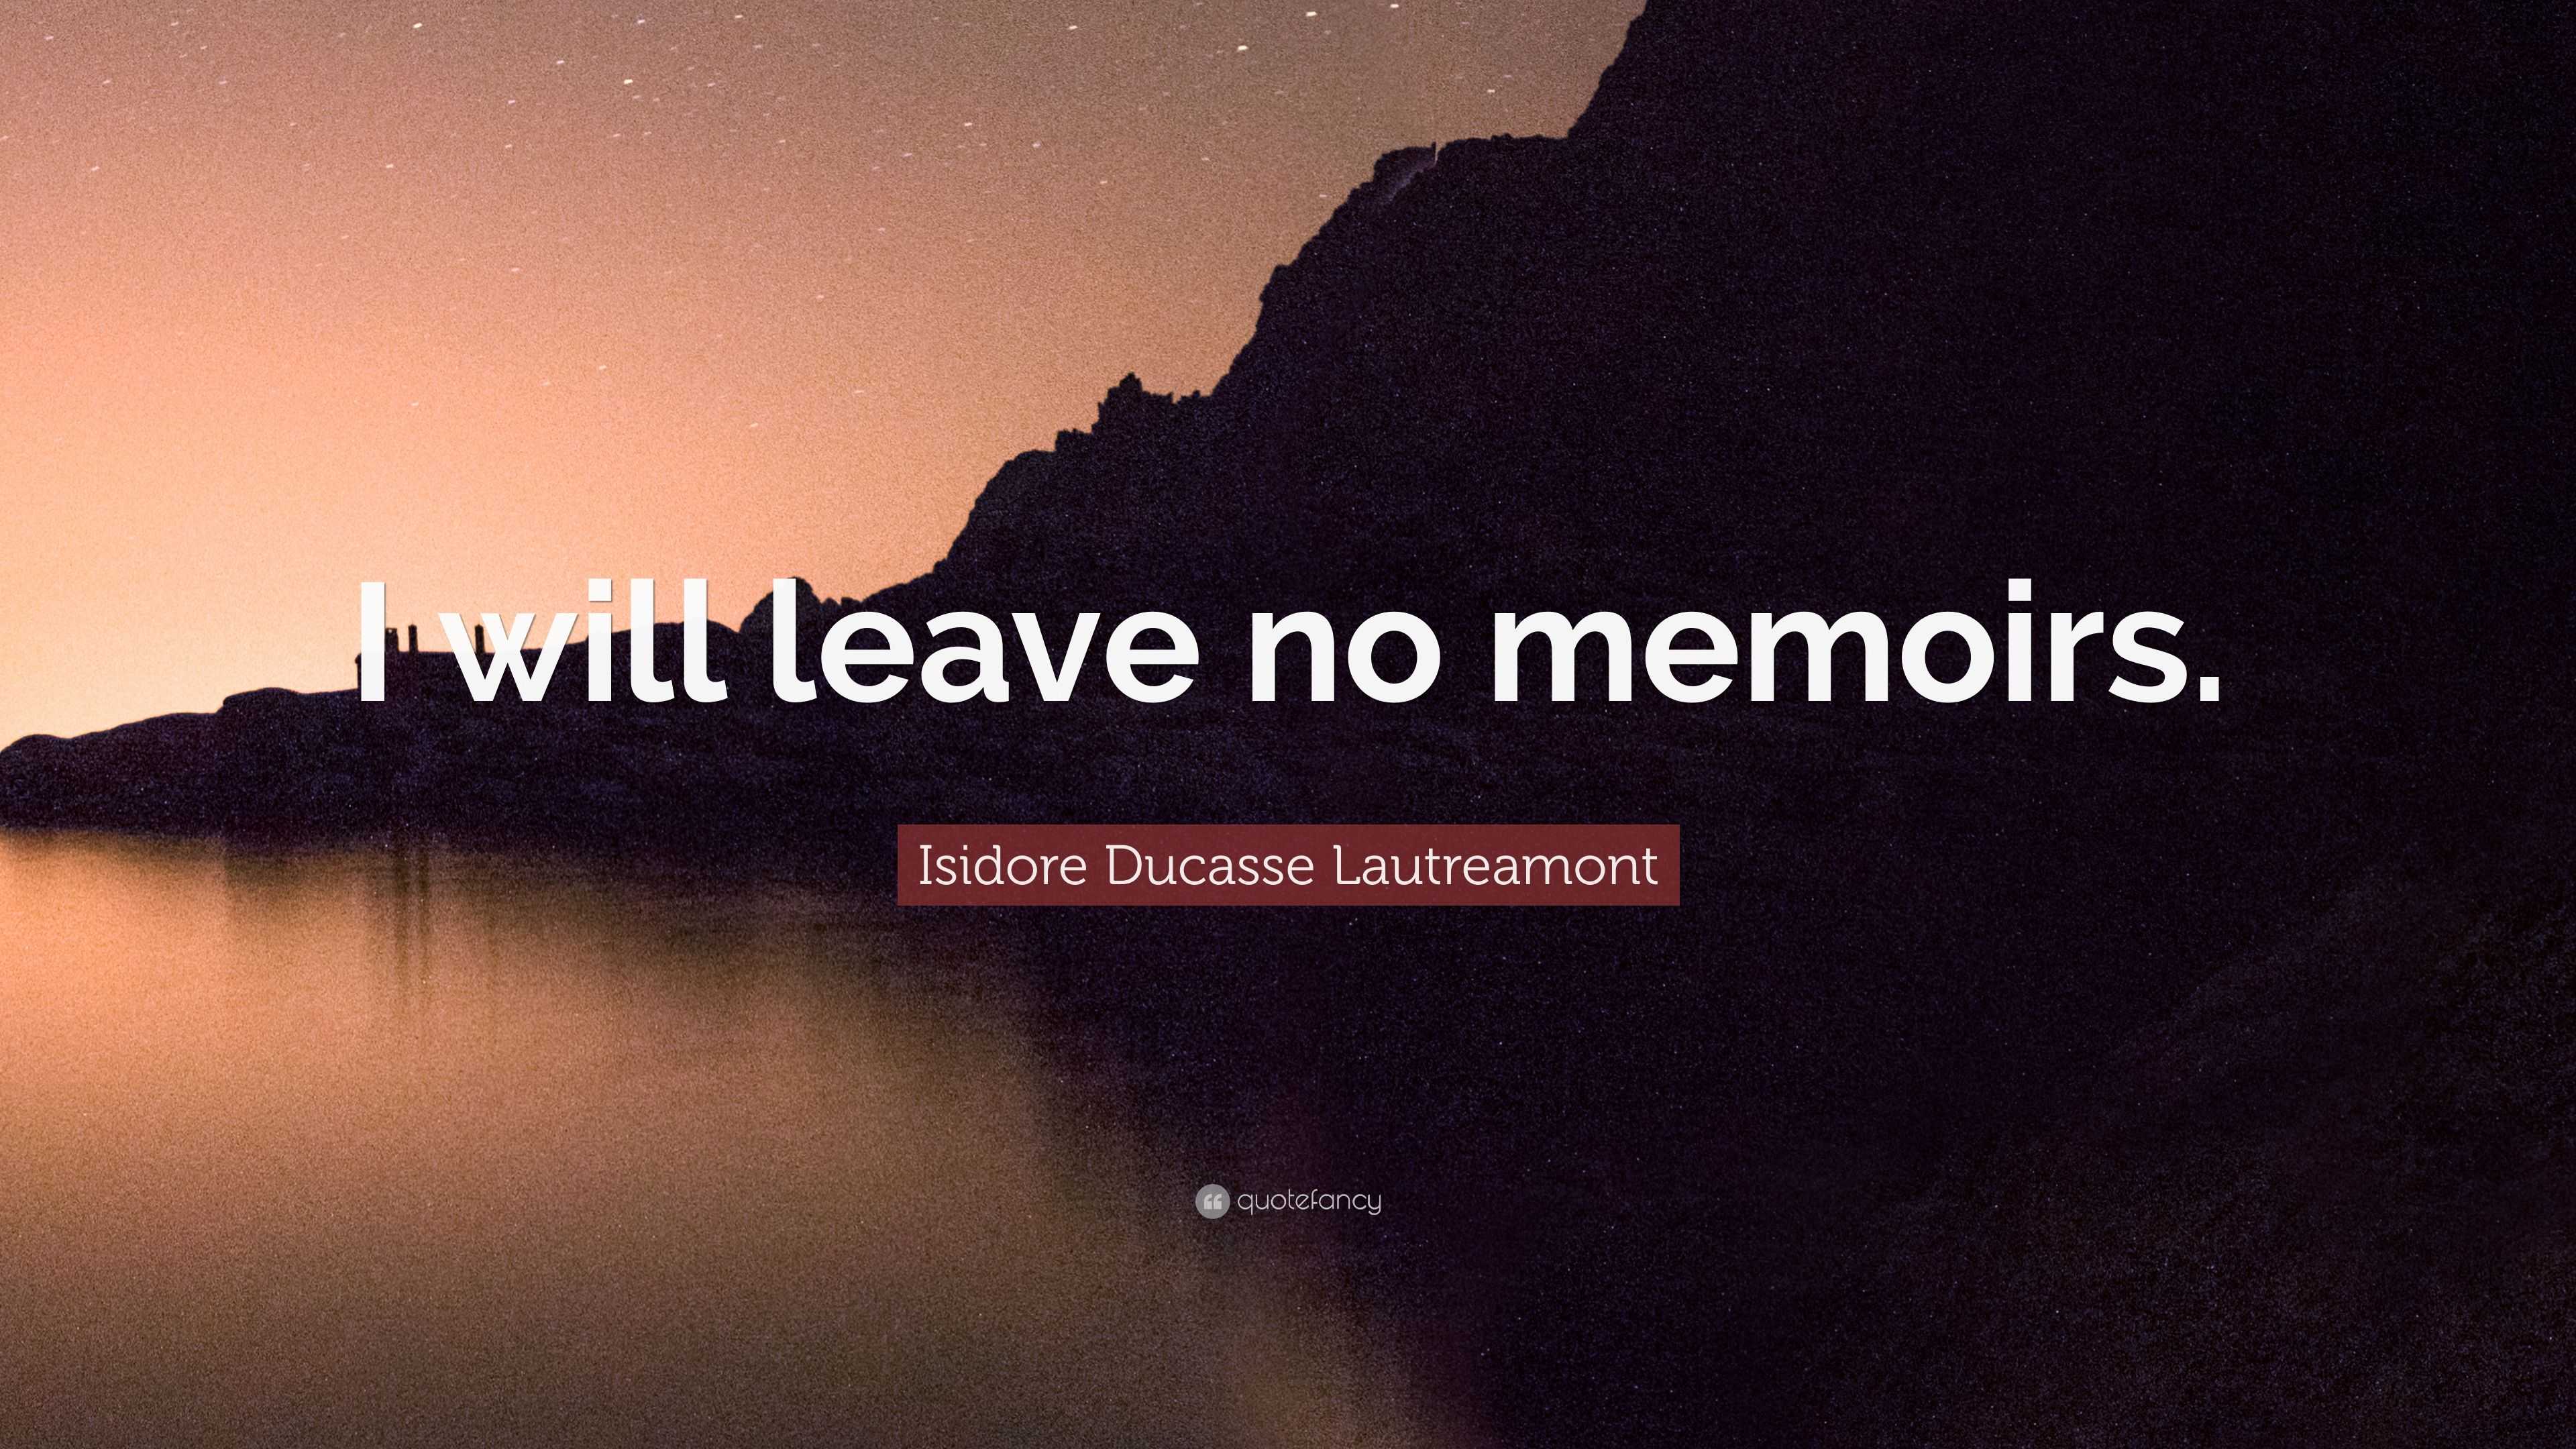 Isidore Ducasse Lautreamont Quote: “I will leave no memoirs.”